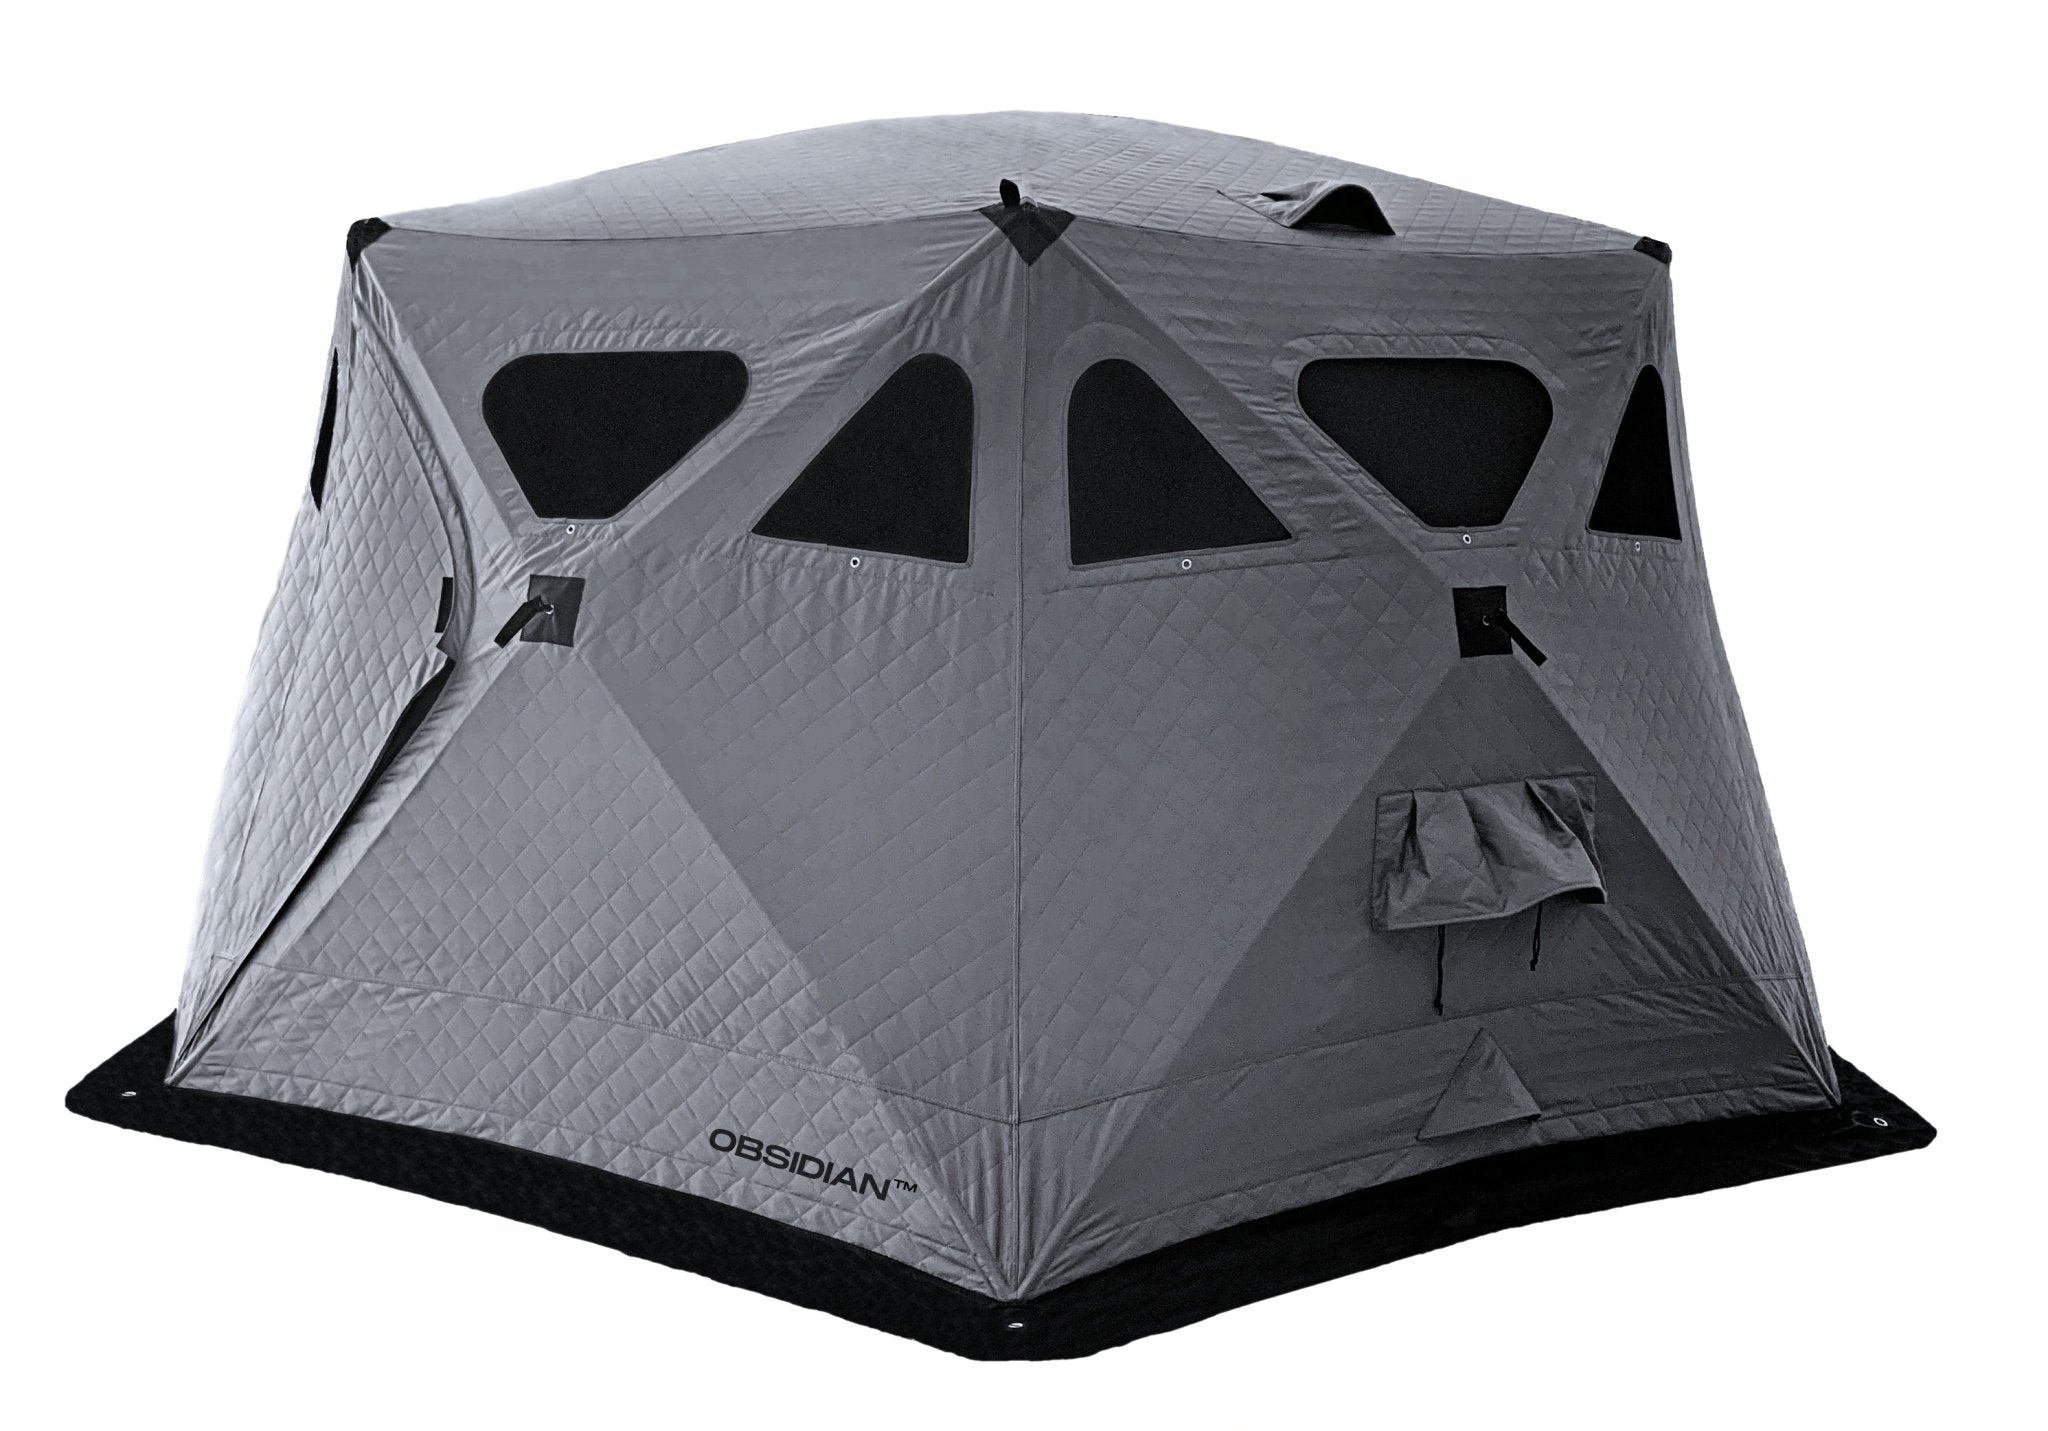 The Ultimate Pop-Up Camping Tent: Obsidian by RDS Gear - Rapid Deployment Shelter Inc.